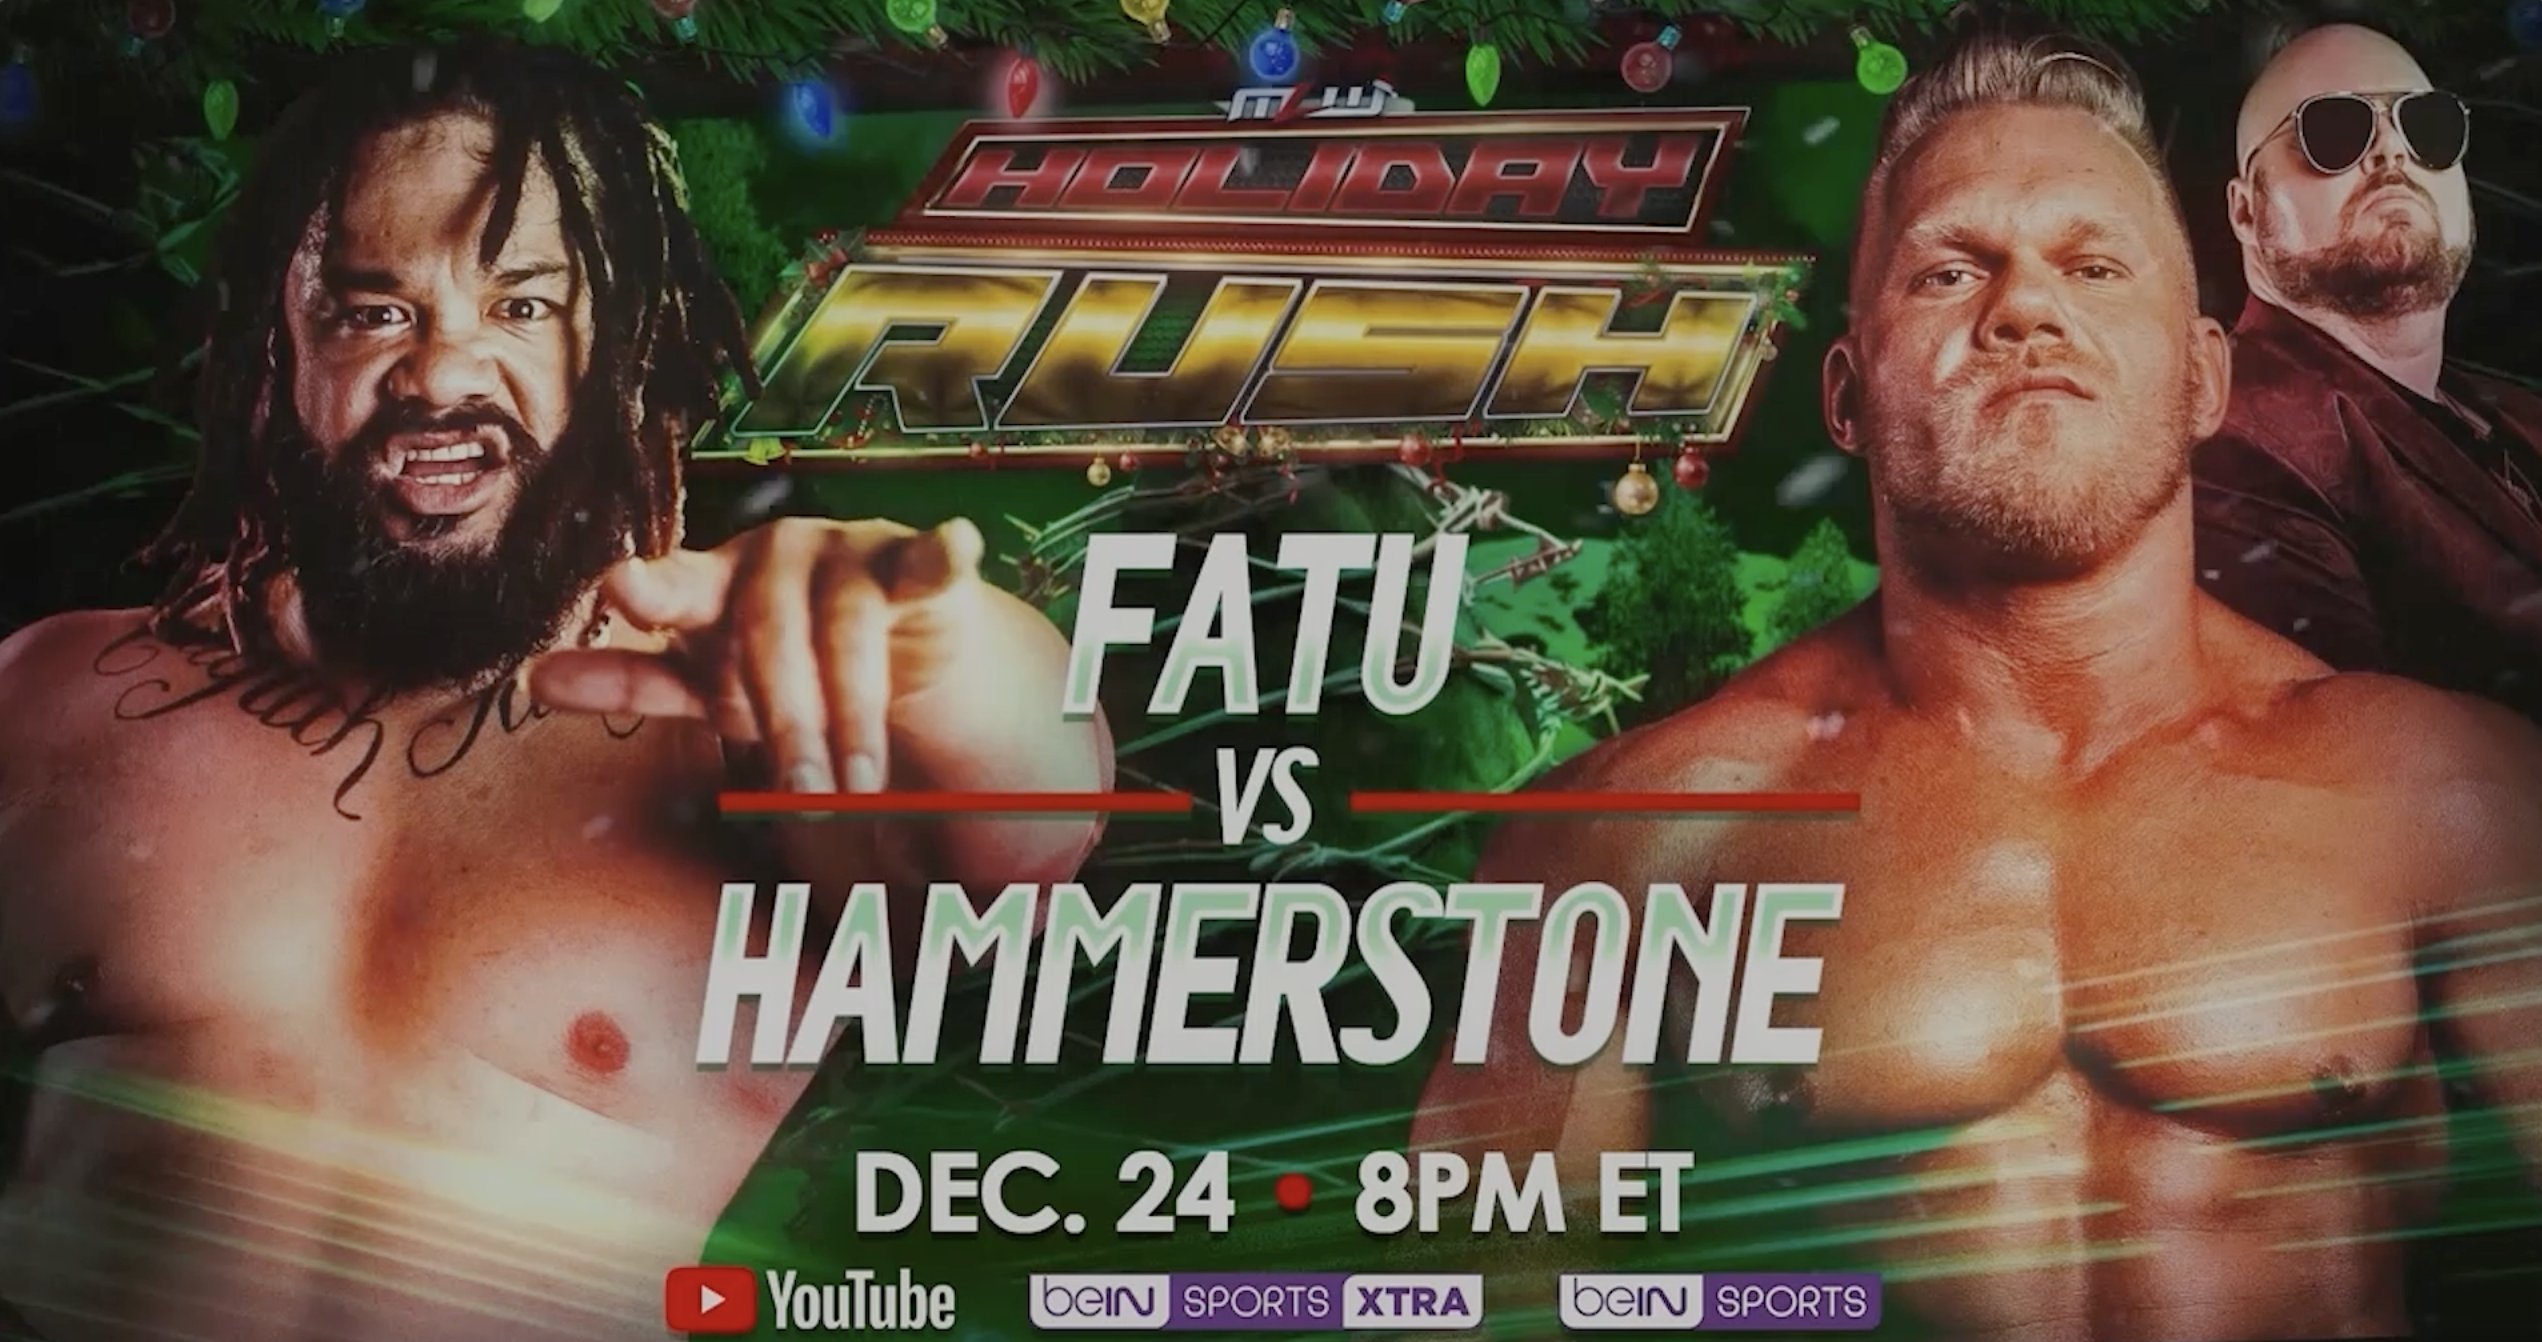 MLW Holiday Rush promotional poster.